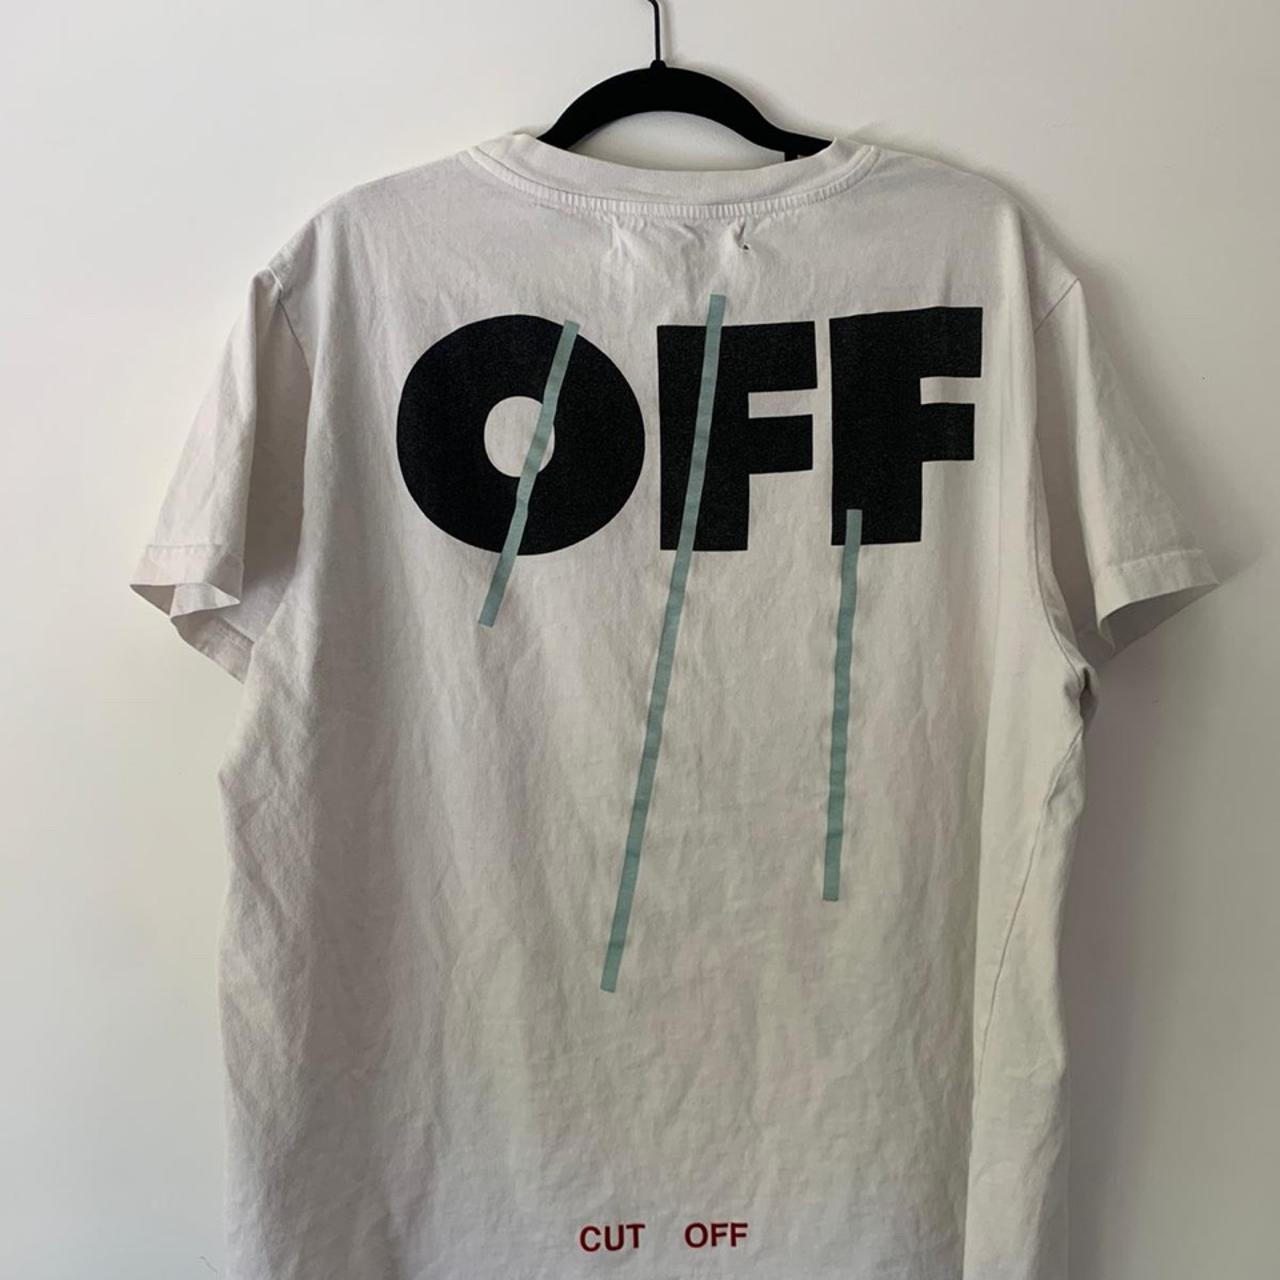 Off White “Silver” Cut off Tee - Size Medium, fits... - Depop